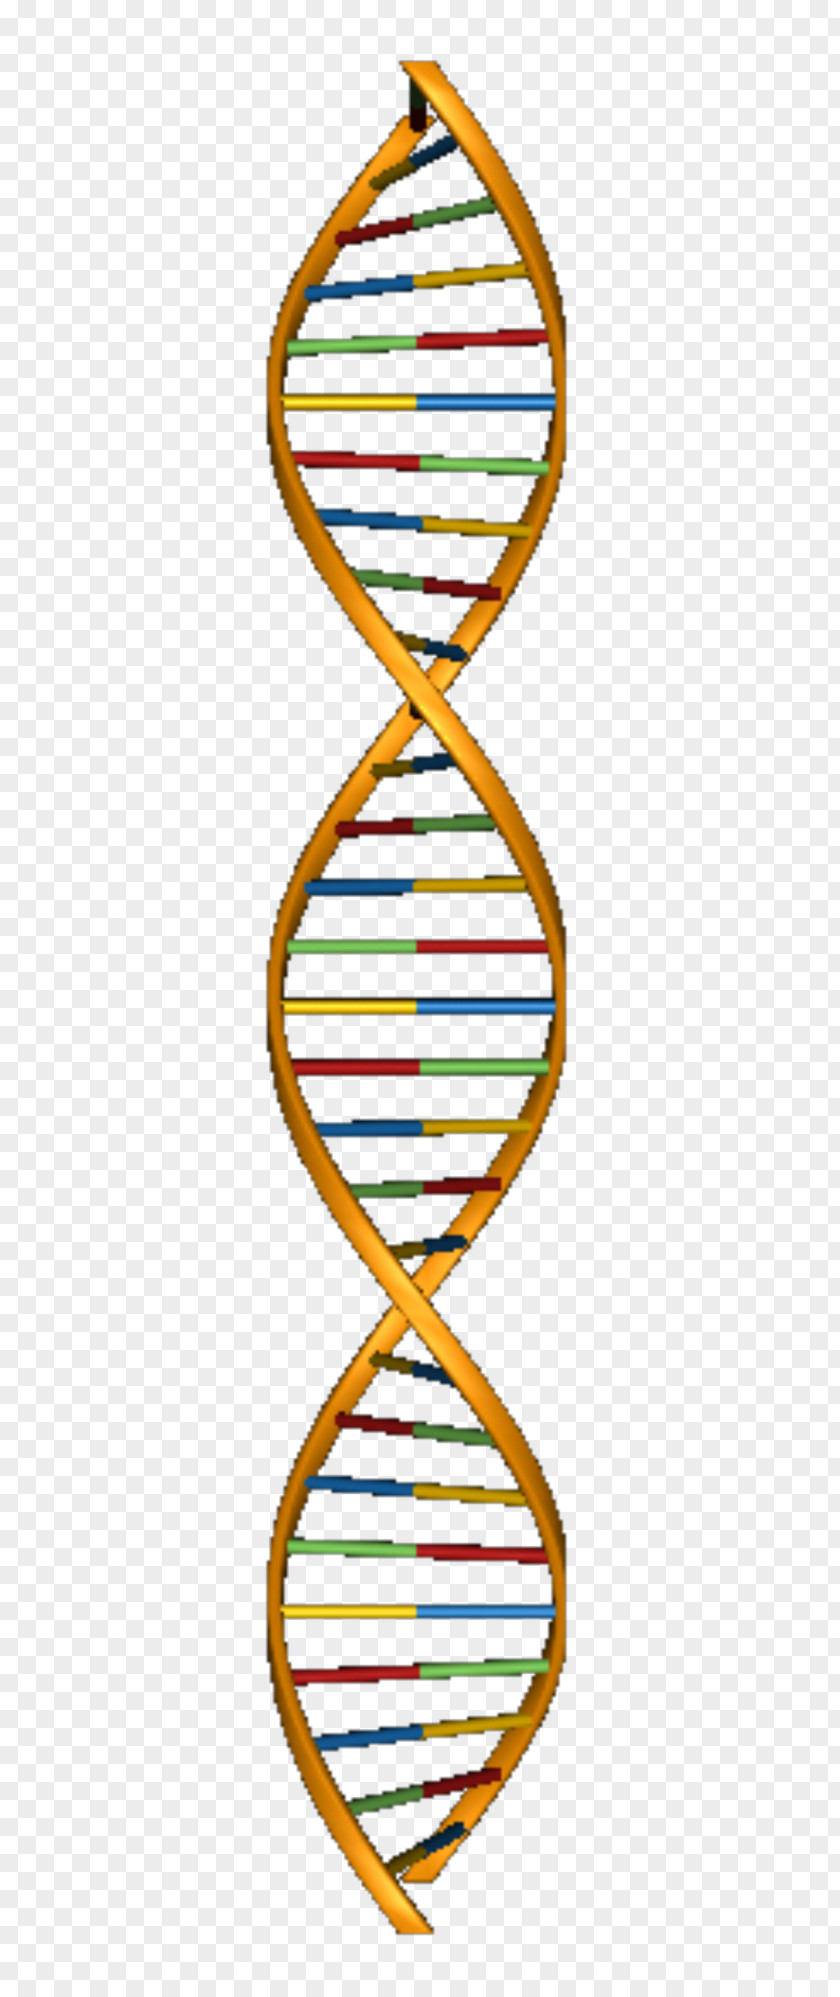 Molecular Models Of DNA Nucleic Acid Structure Double Helix Clip Art PNG